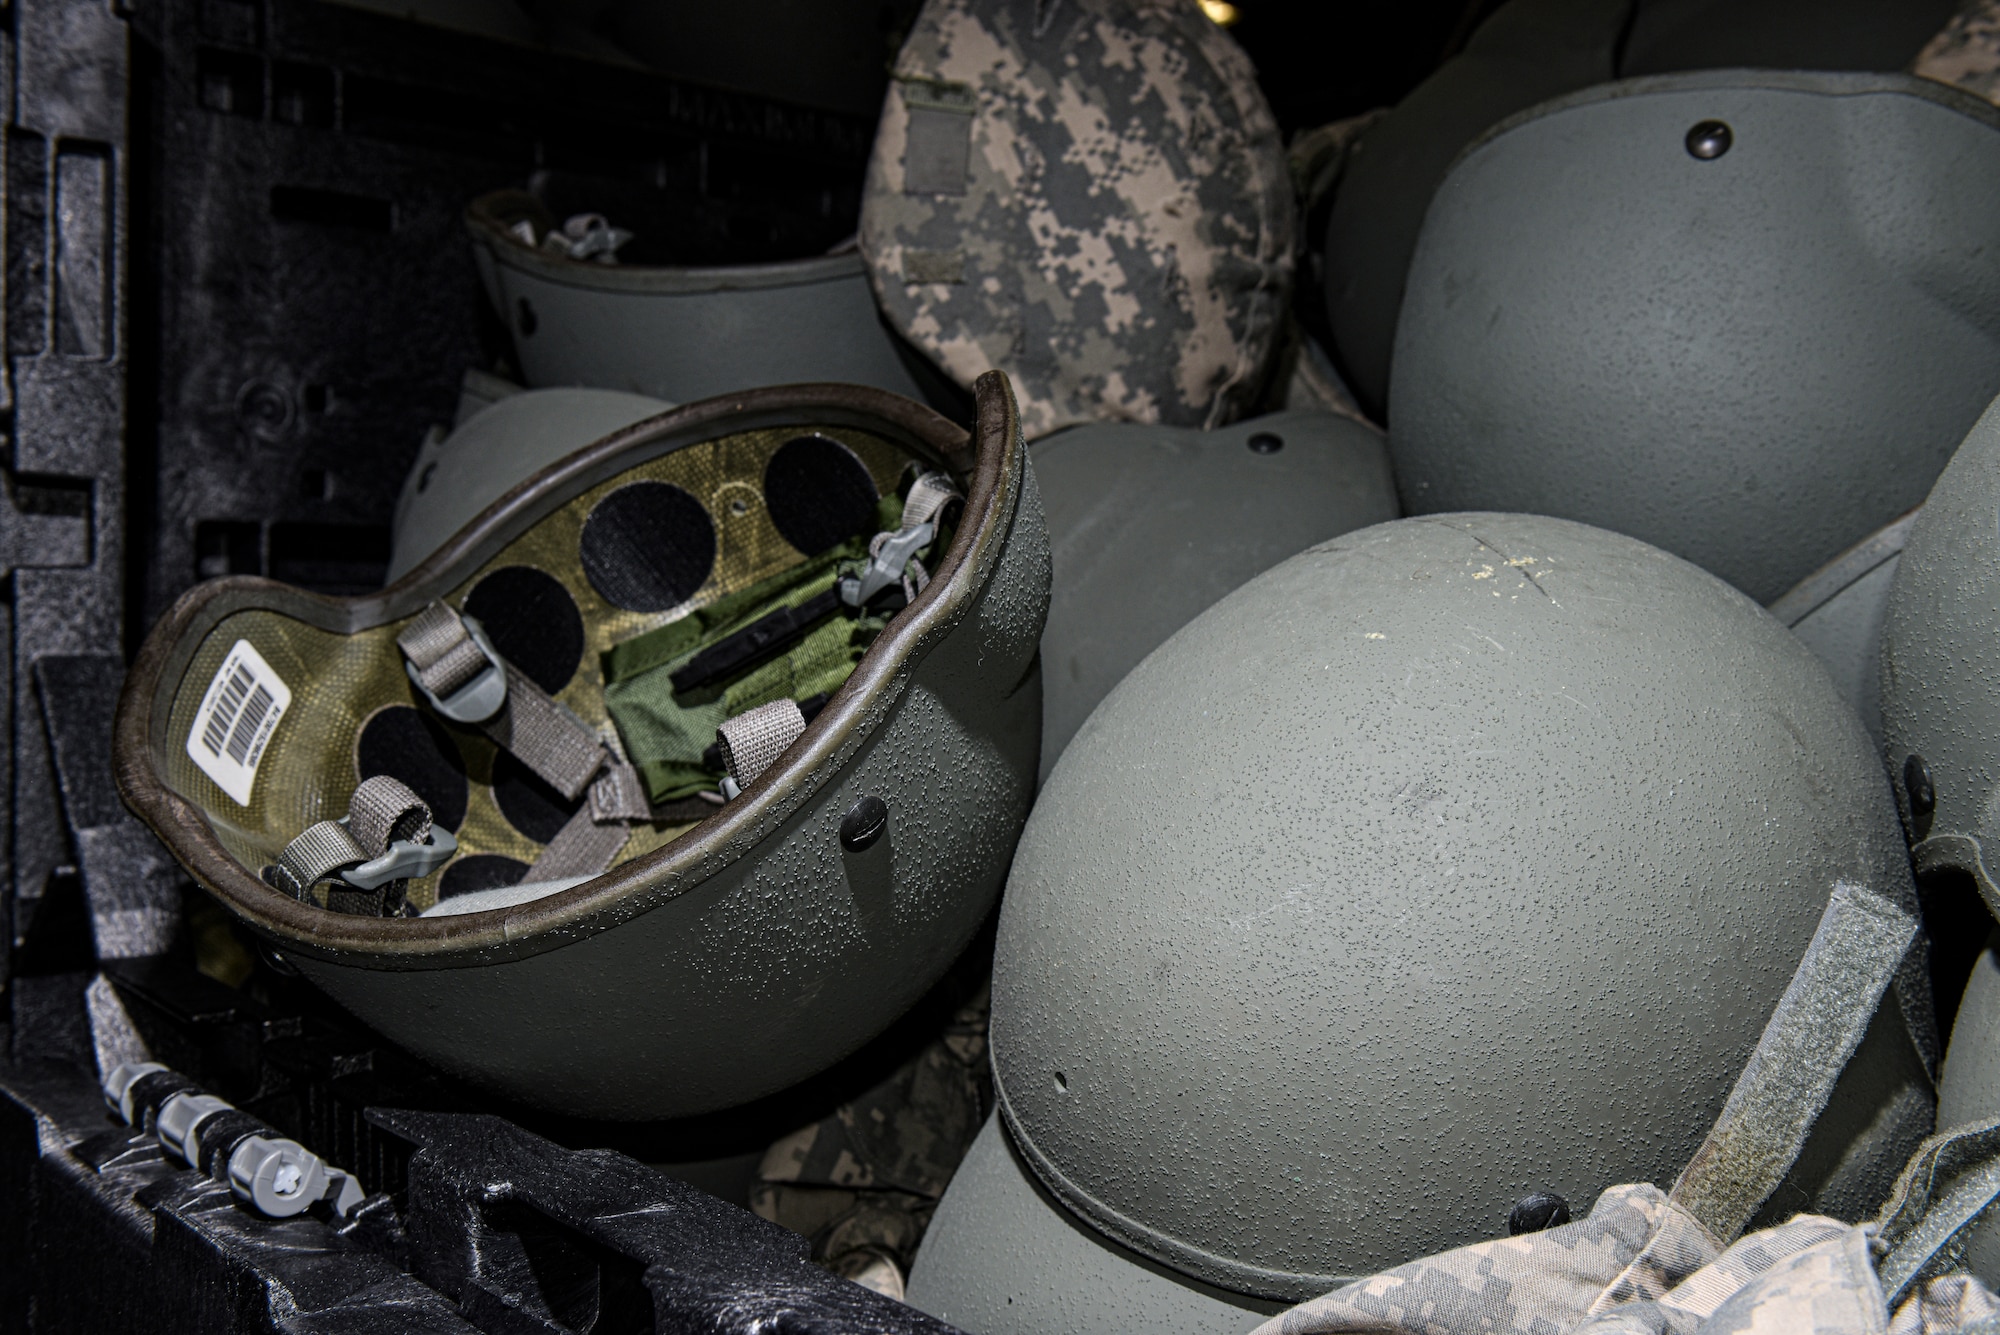 The 6th Logistics Readiness Squadron at MacDill Air Force Base, Florida issues out helmets as part of a deployment or training kit, Jan. 18, 2022.